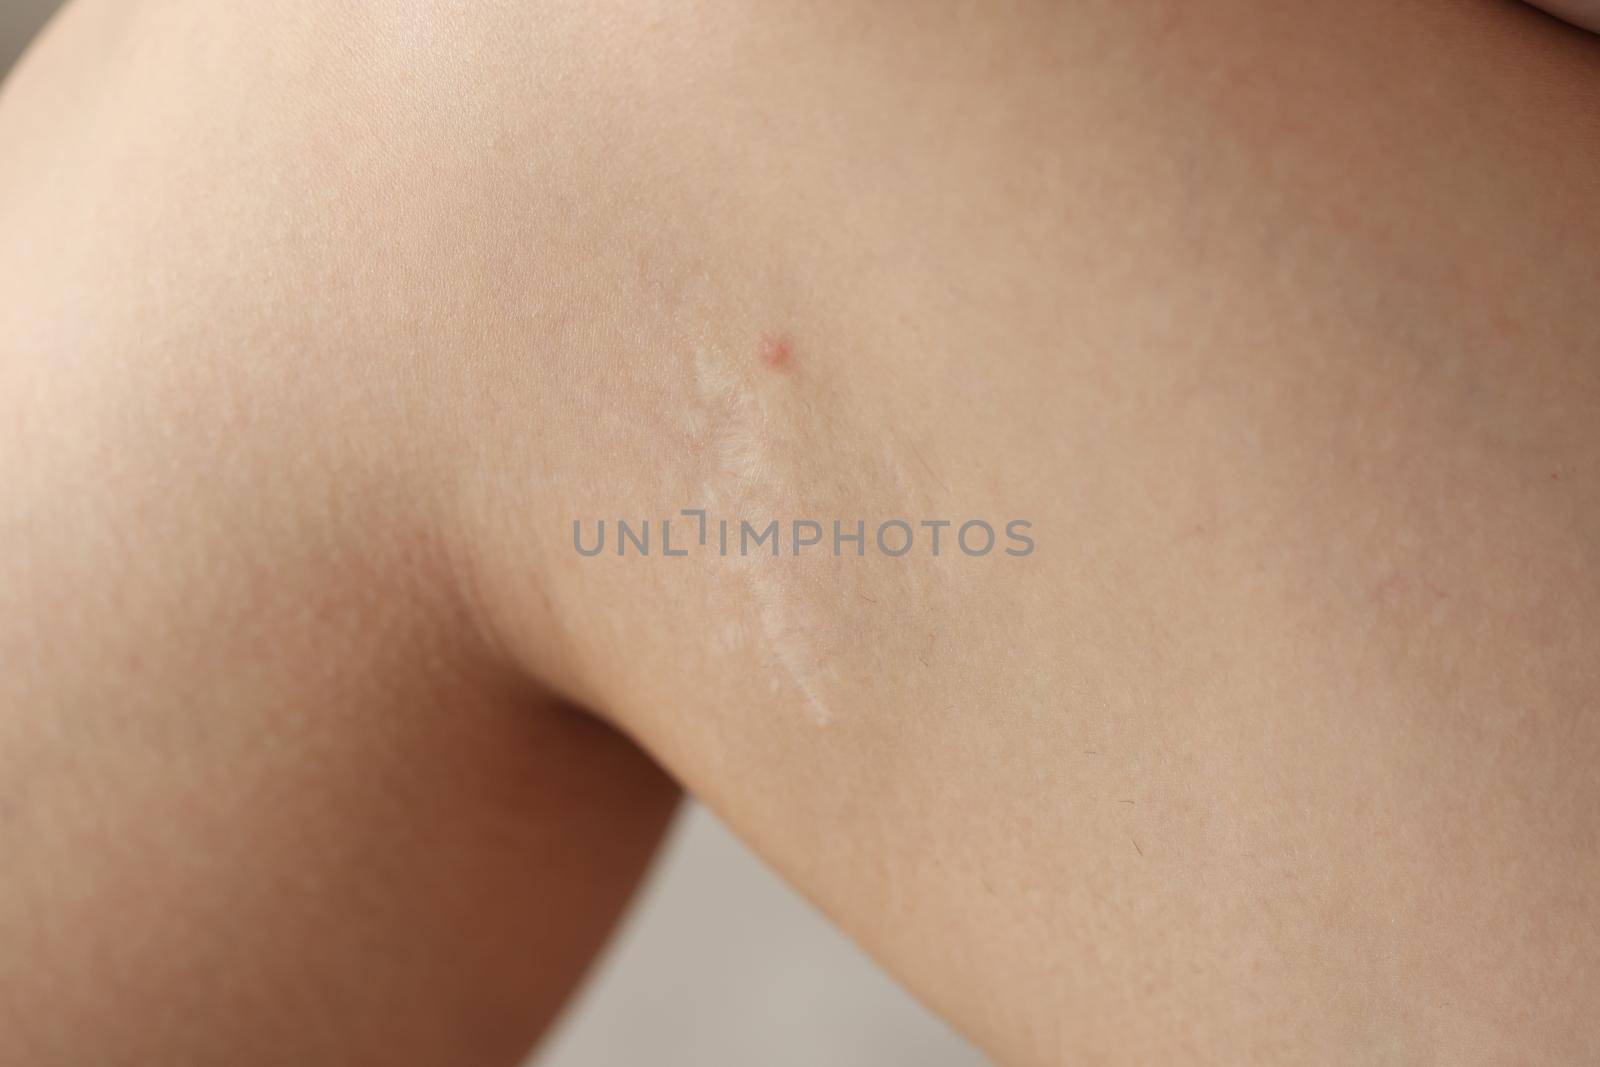 An inflamed pimple on the leg close-up by kuprevich